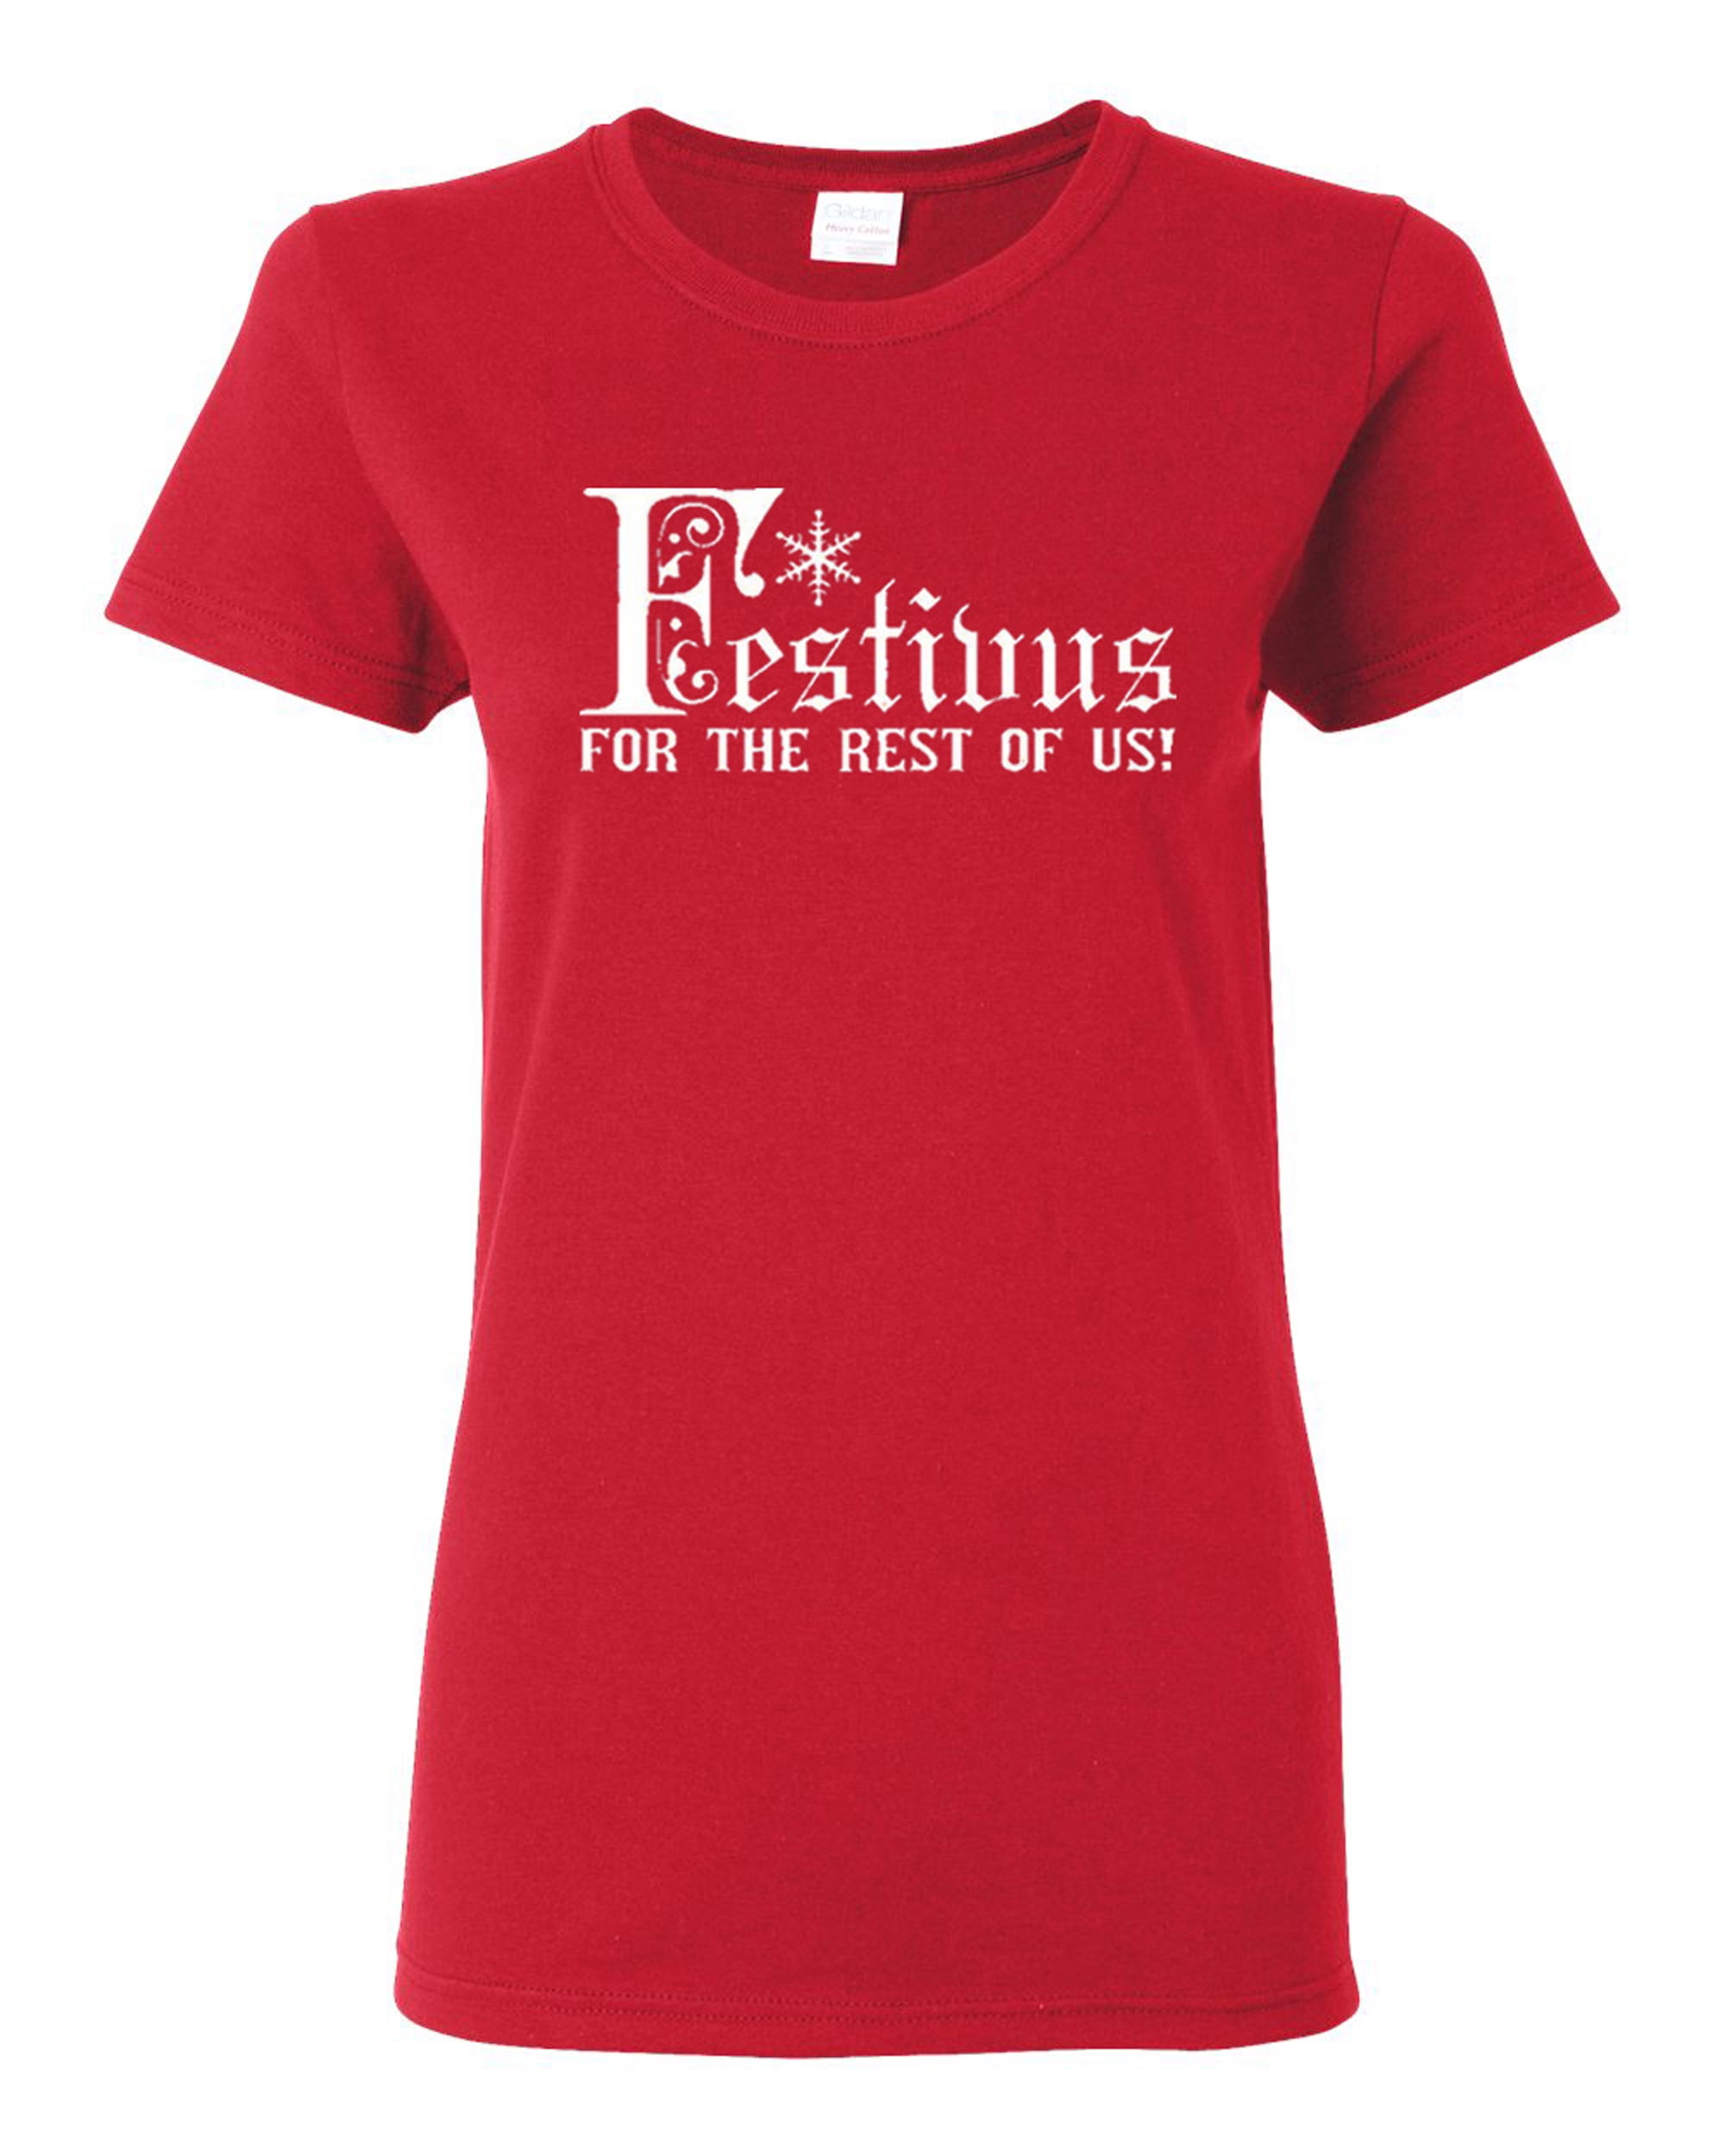 Adult Festivus For The Rest Of Us Funny Humor Parody Christmas T-Shirt Tee 